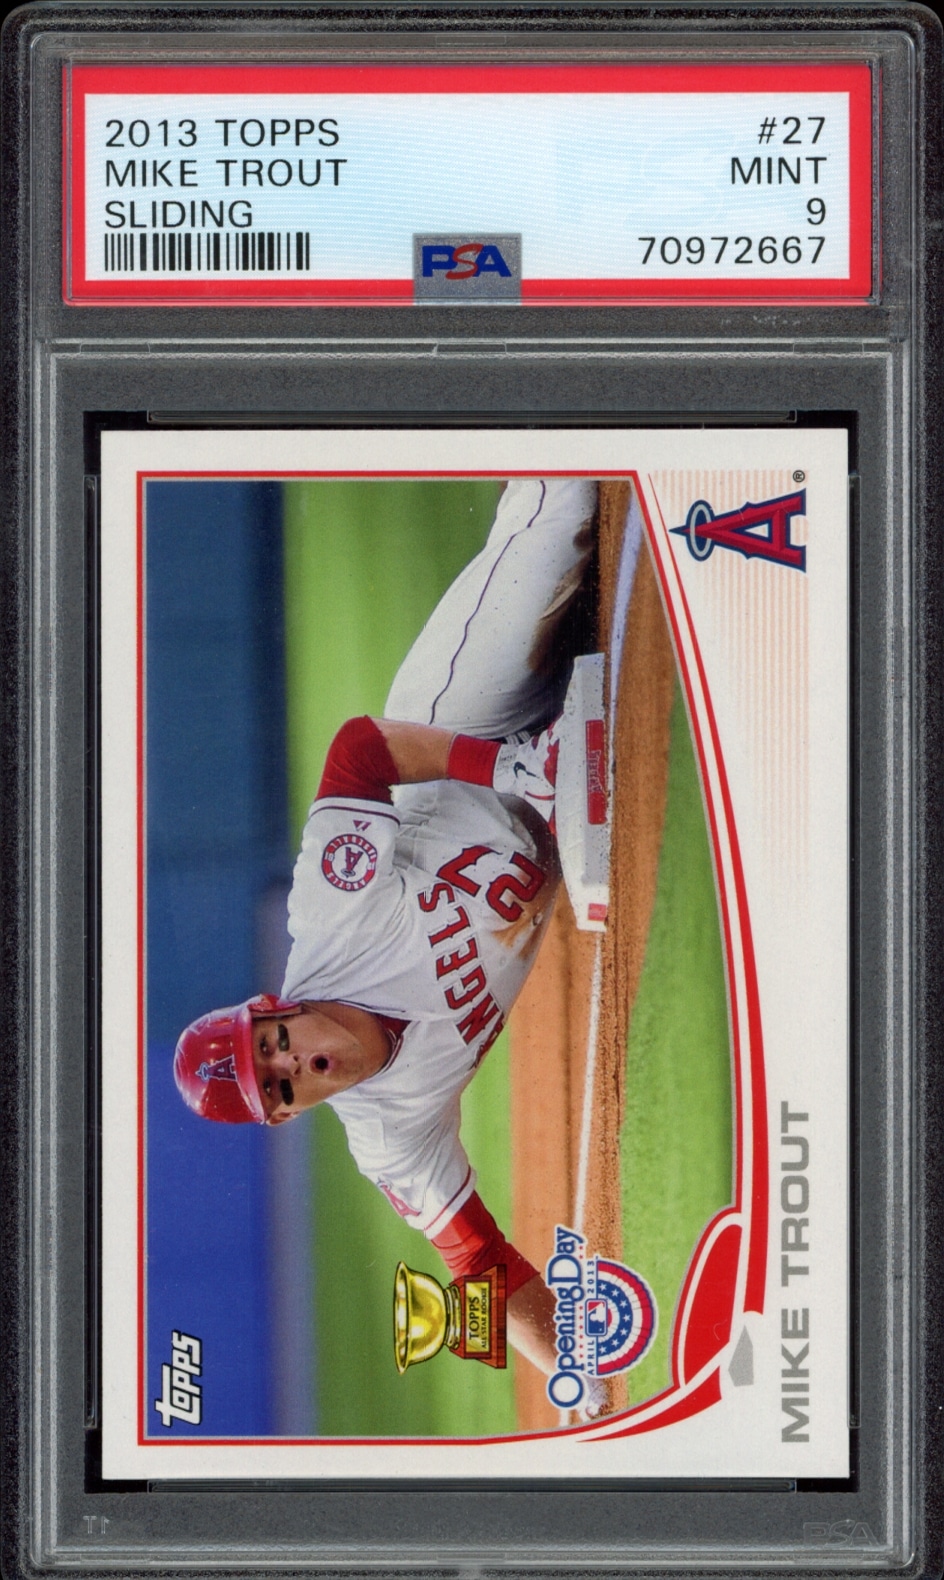 2013 Topps Mike Trout baseball card, Sliding Stars series, Mint 9 graded by PSA.